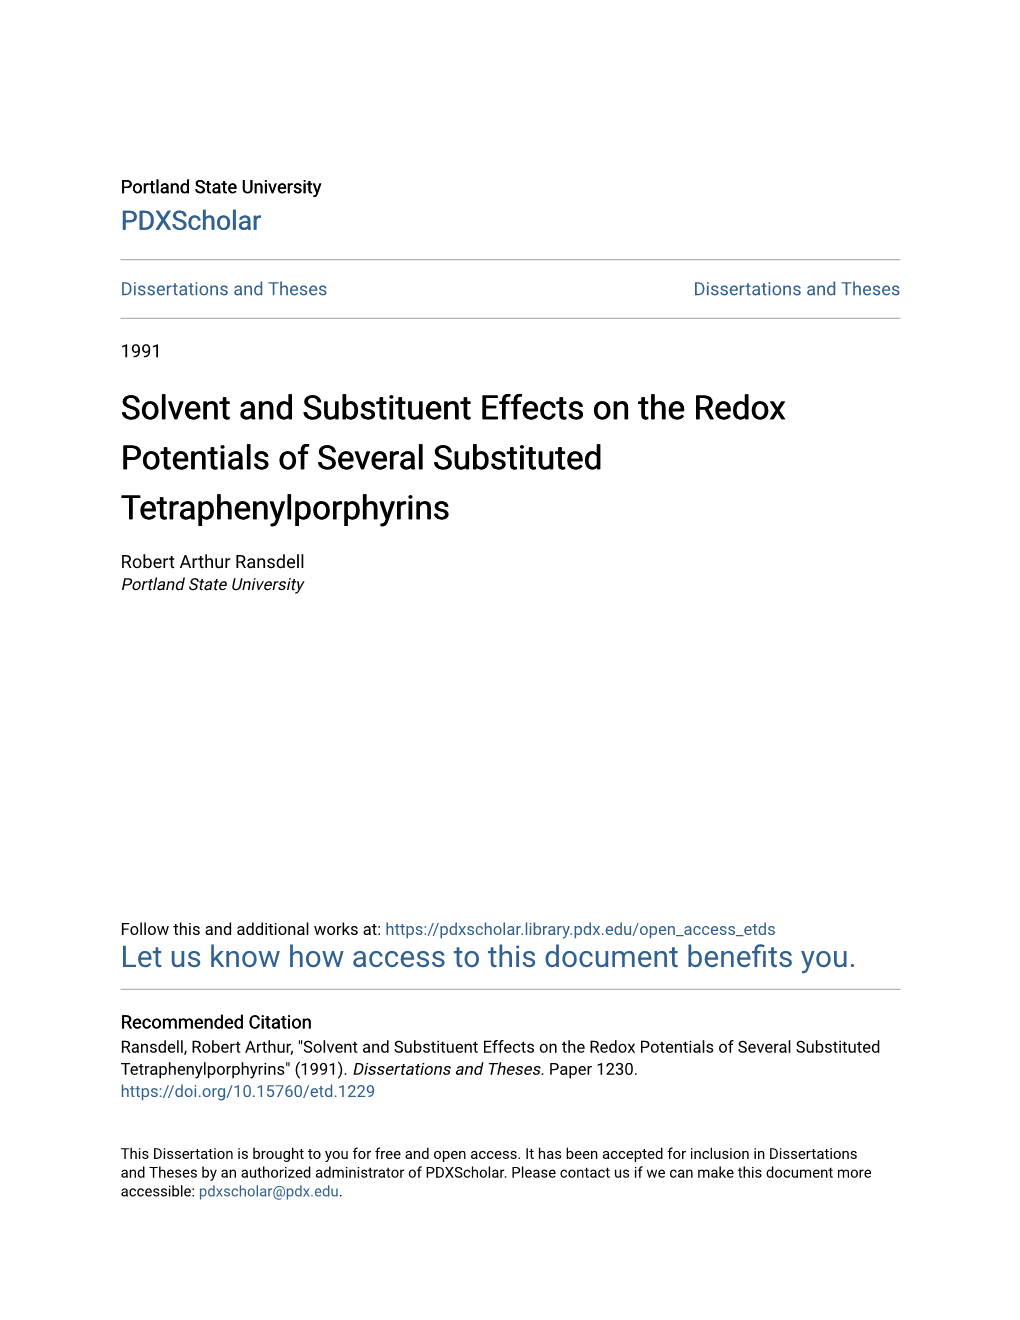 Solvent and Substituent Effects on the Redox Potentials of Several Substituted Tetraphenylporphyrins